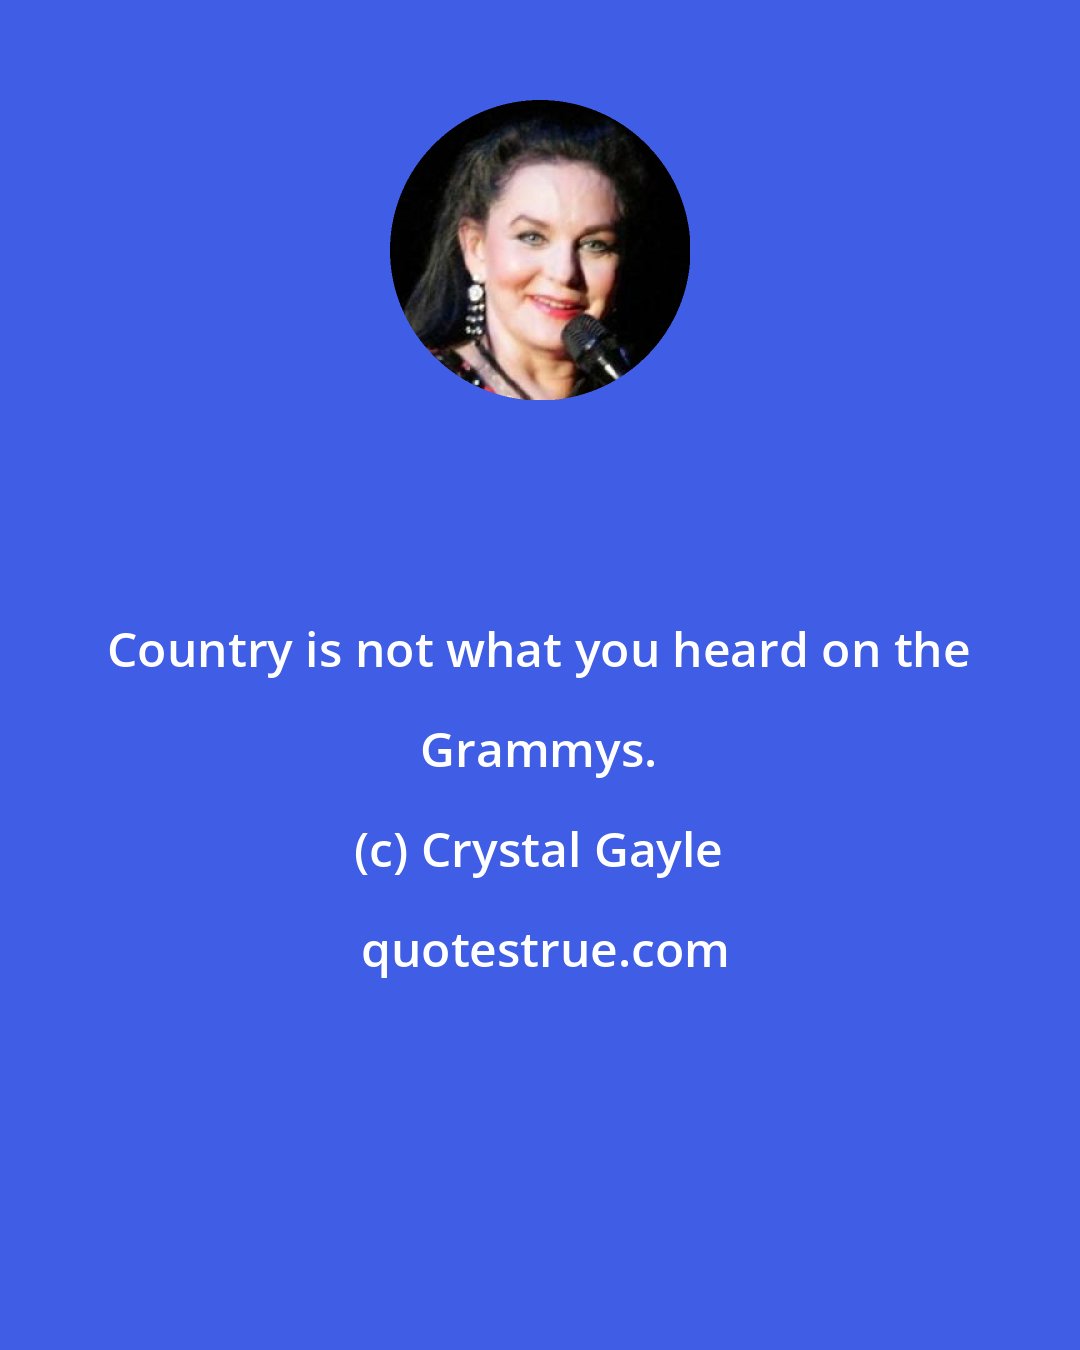 Crystal Gayle: Country is not what you heard on the Grammys.